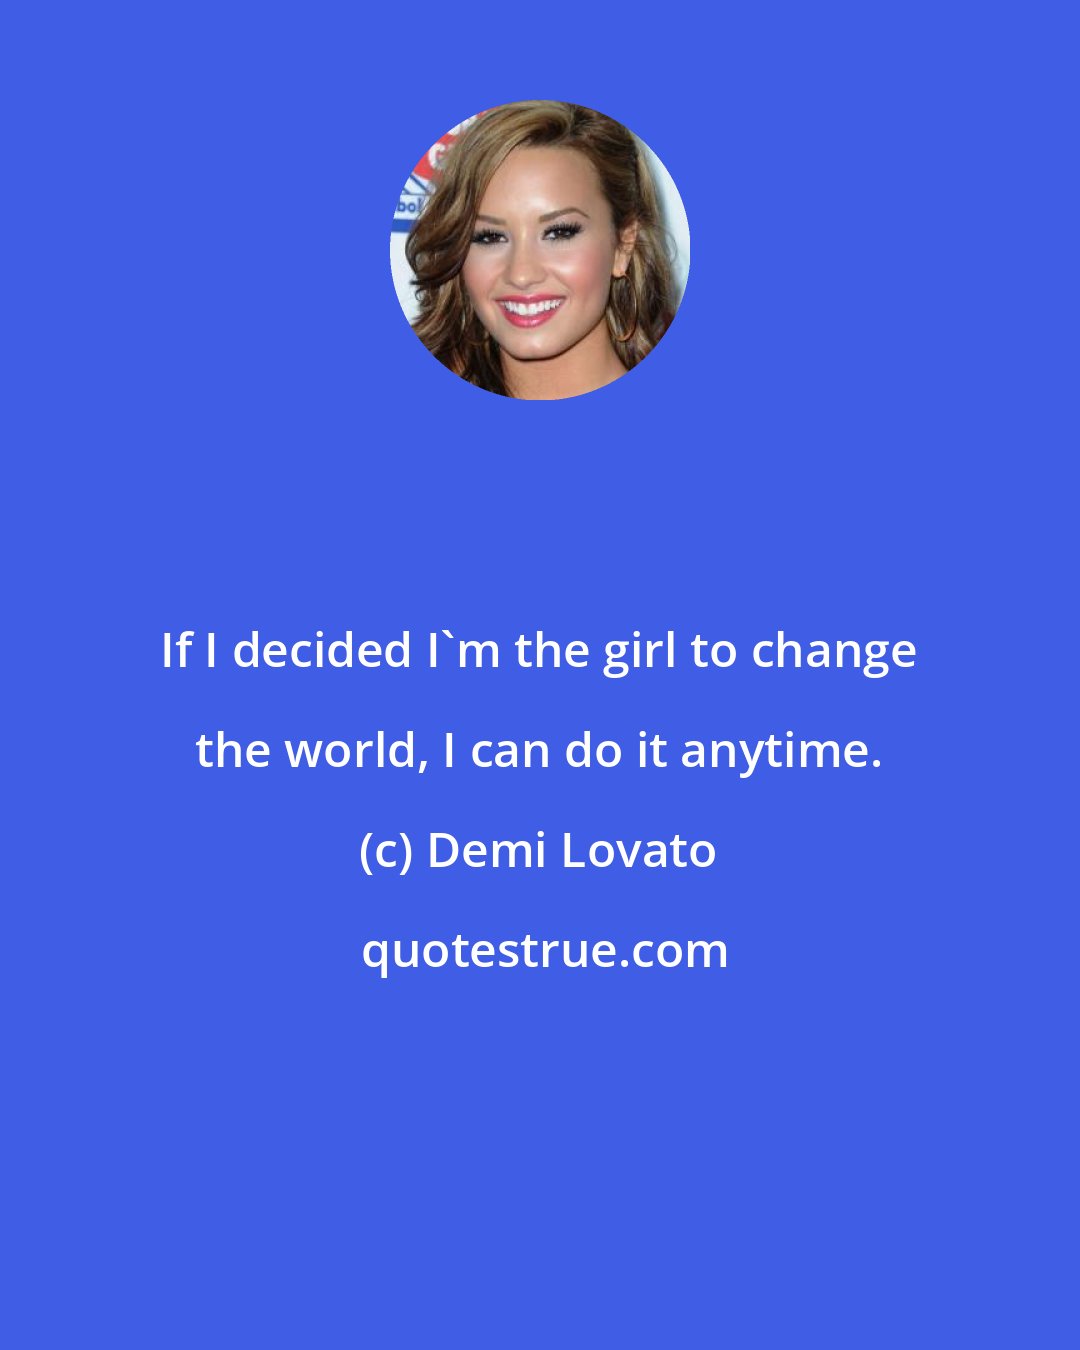 Demi Lovato: If I decided I'm the girl to change the world, I can do it anytime.